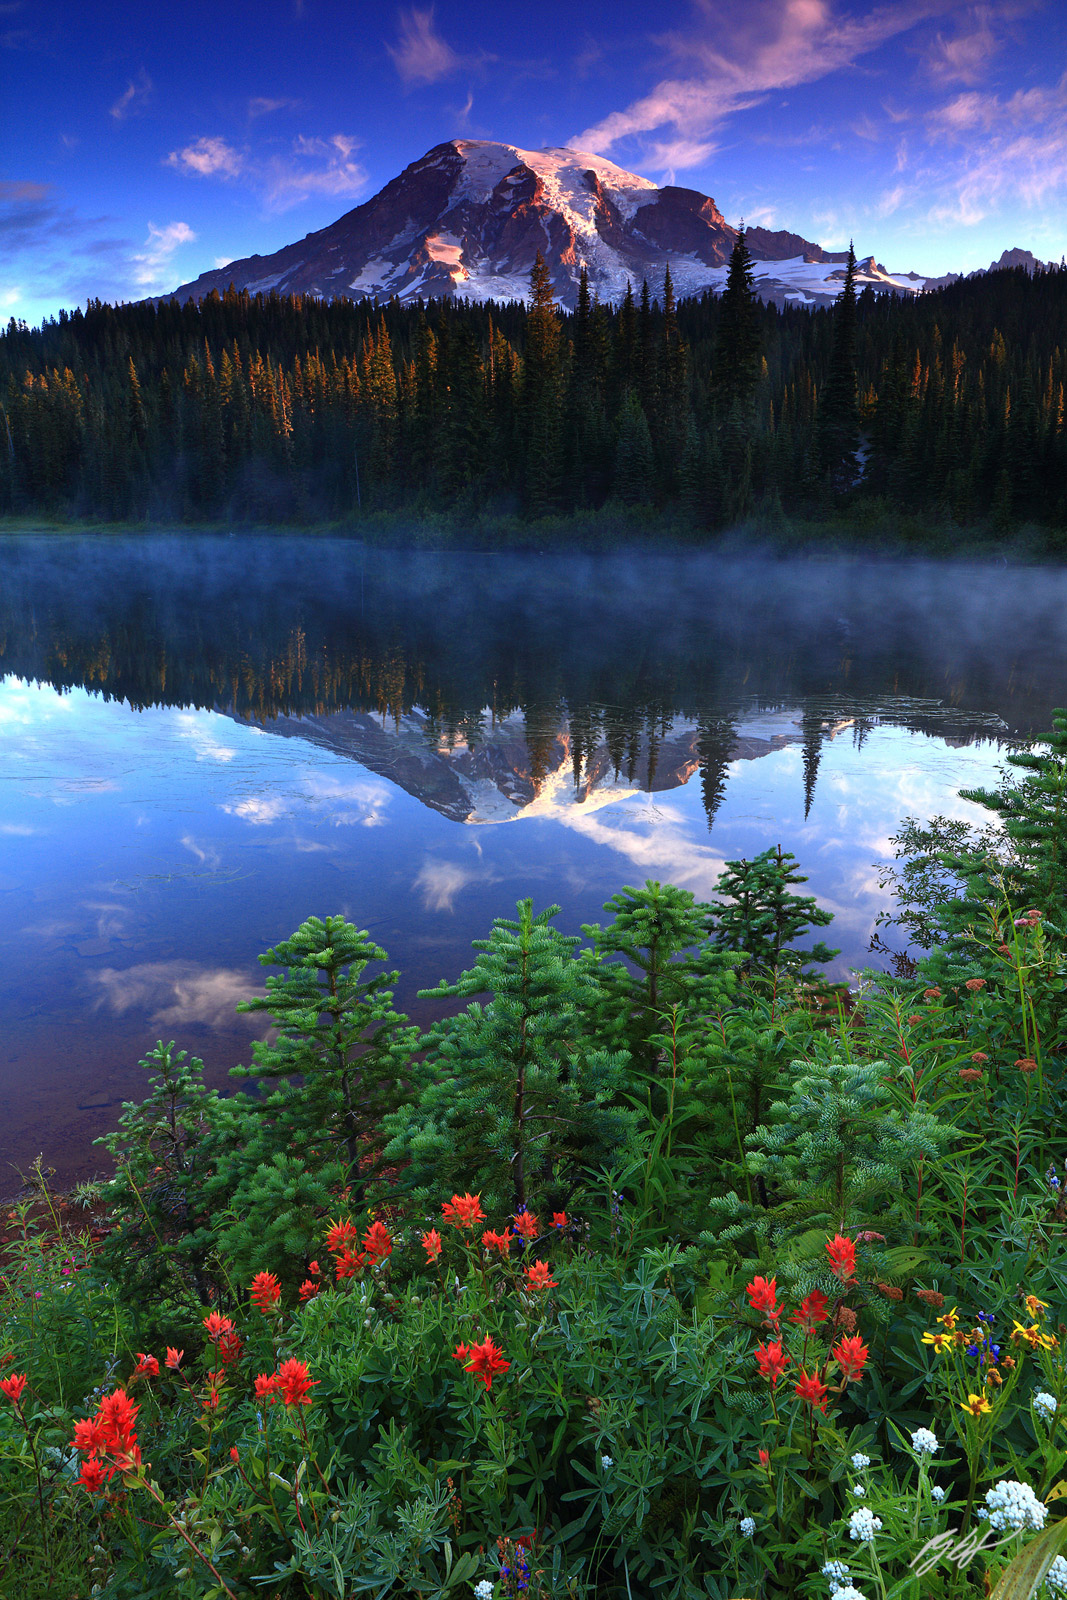 Sunrise Wildflowers and Mt Rainier Reflected in Reflection Lake in Mt Rainier National Park in Washington